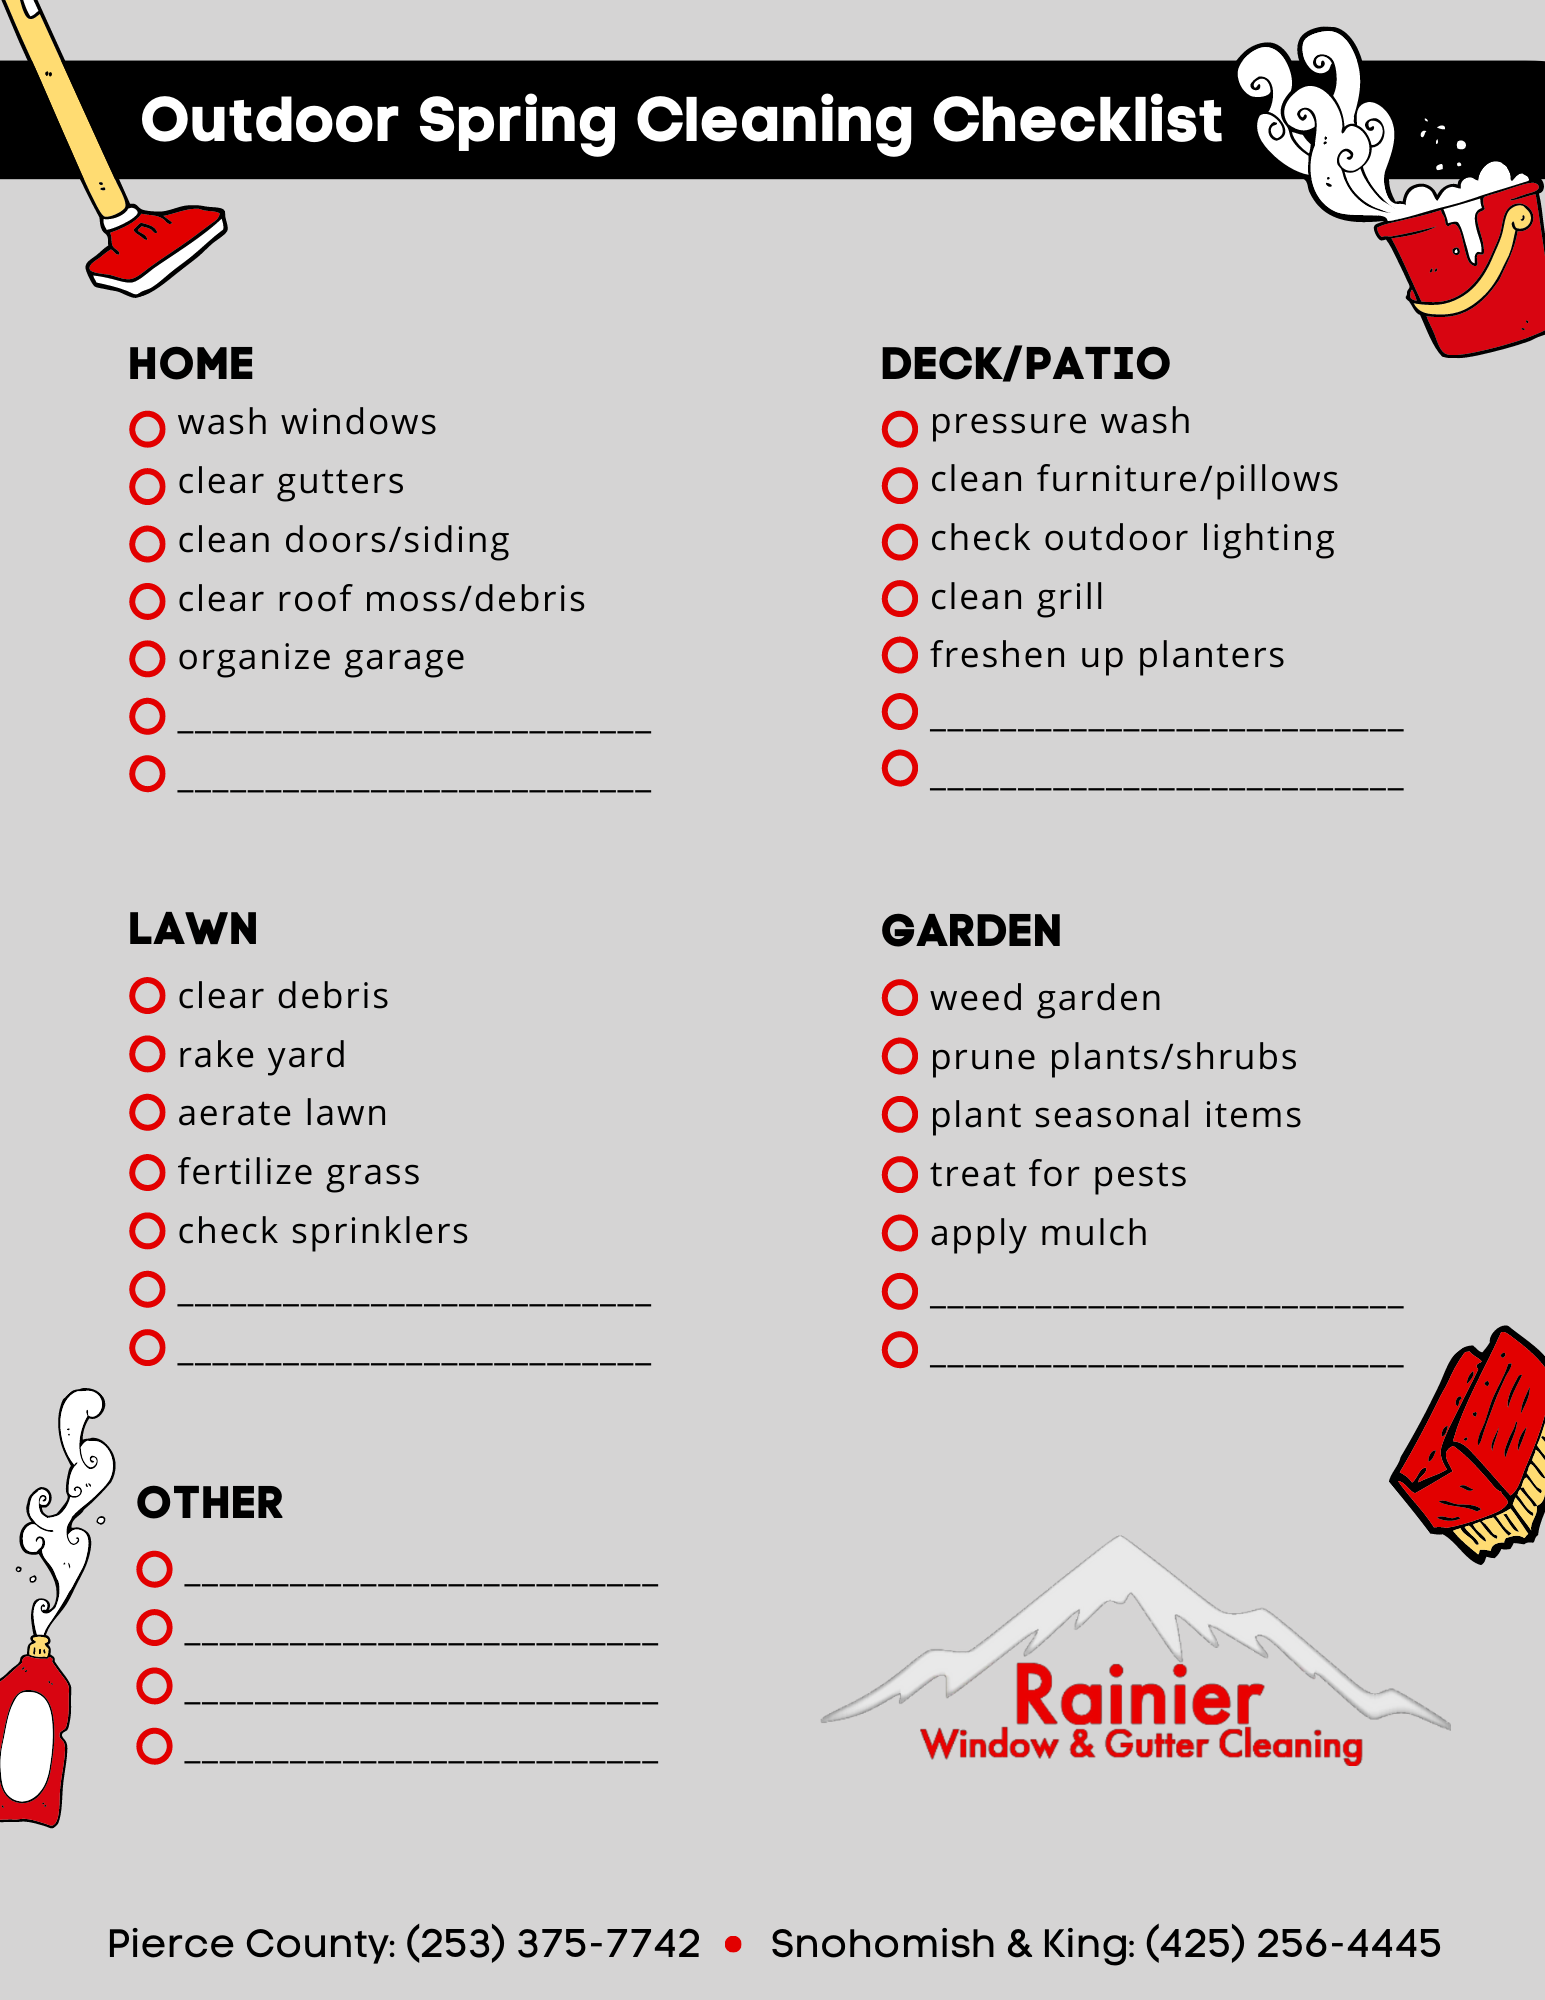 Rainier Window, Roof Cleaning, Moss Removal and Gutter Cleaning | INSIDE—Spring Cleaning Checklist for Your Outdoors ✅